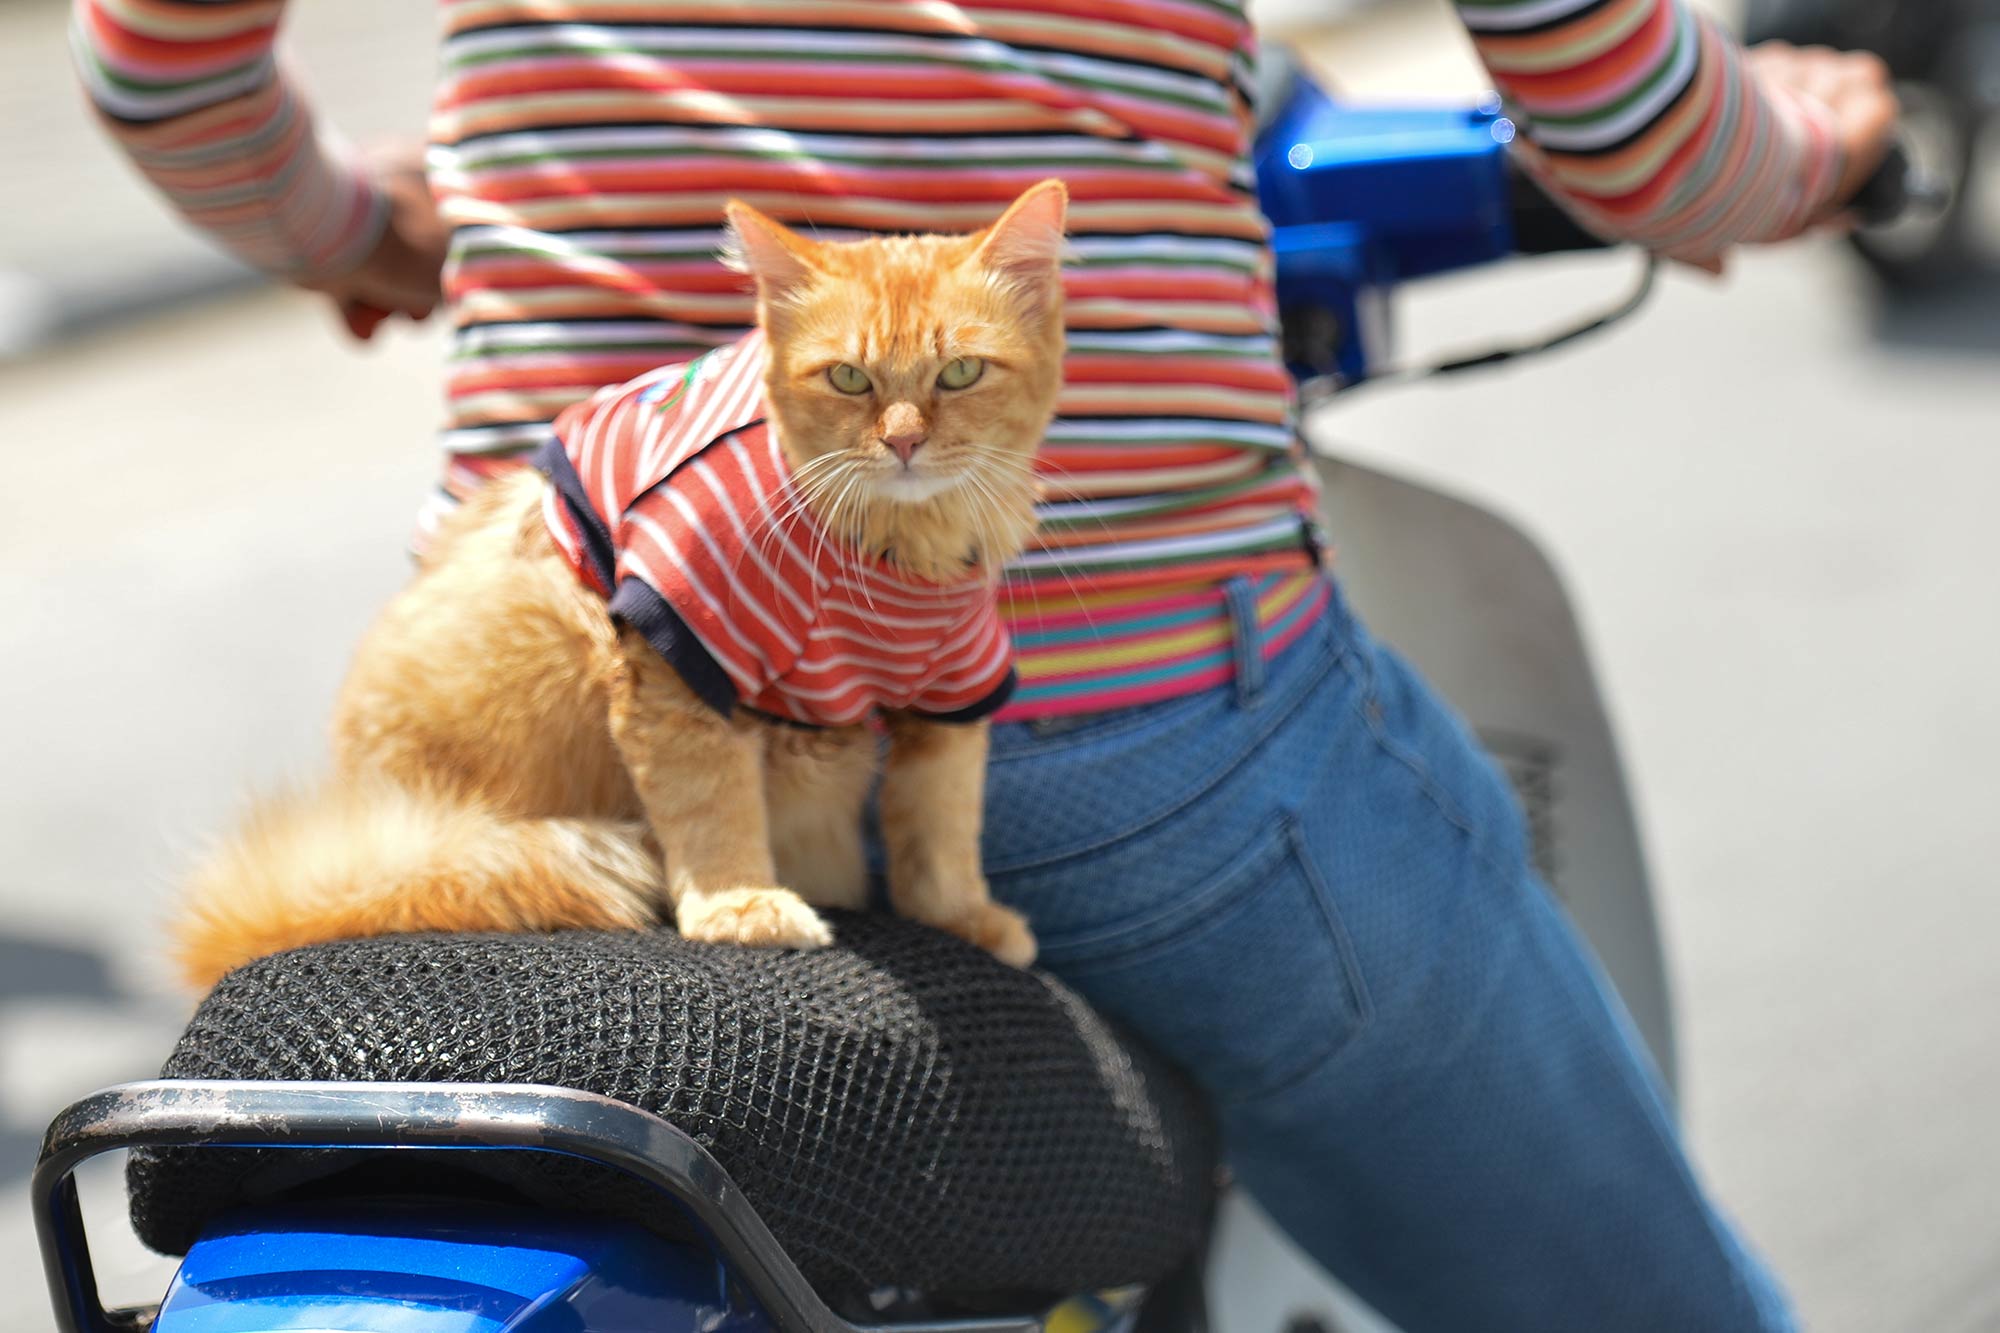 One scooter rider in Malaysia likes to dress up his cat in matching t-shirts.